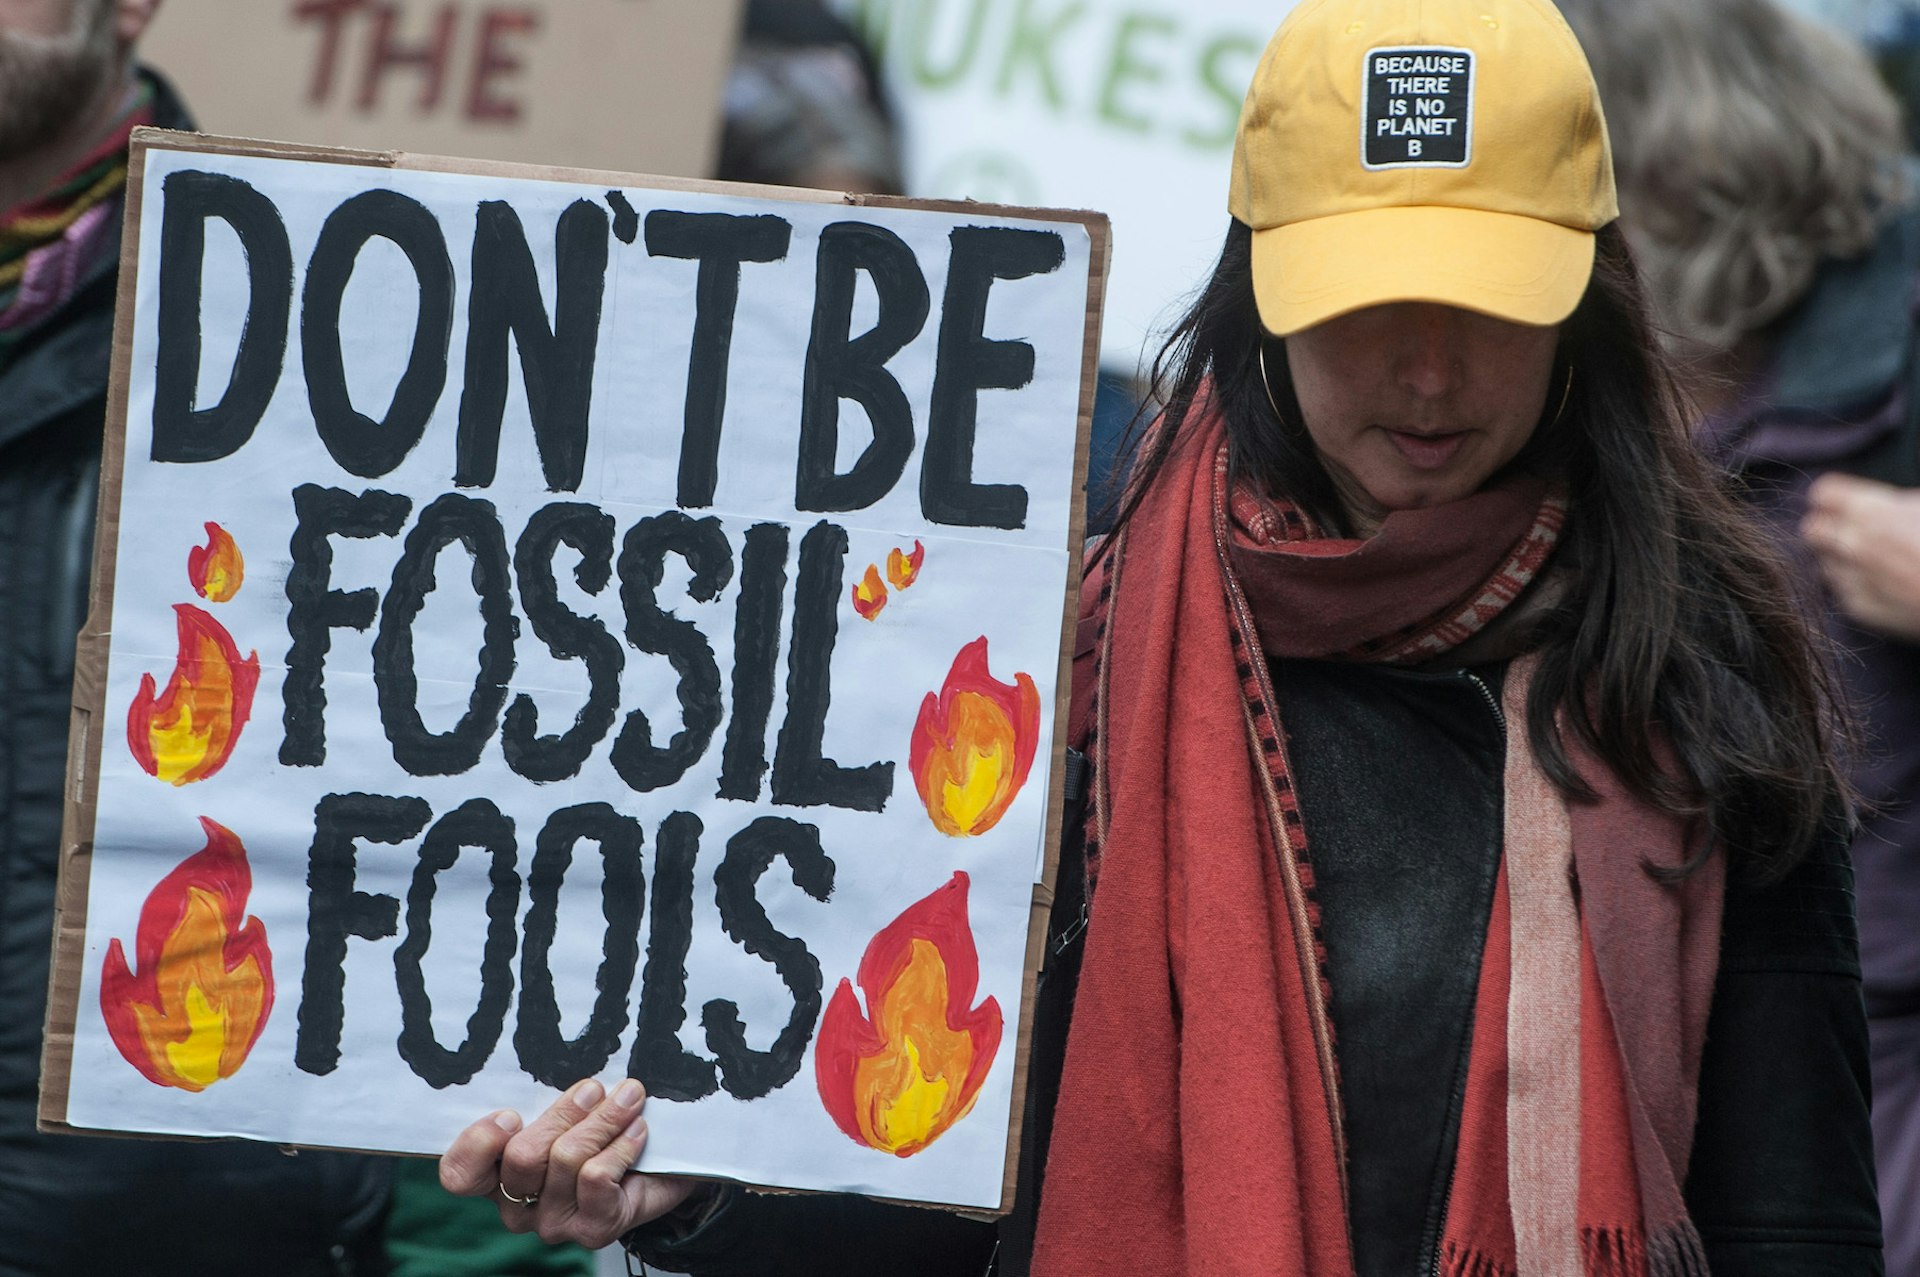 Universities are failing students on the climate crisis